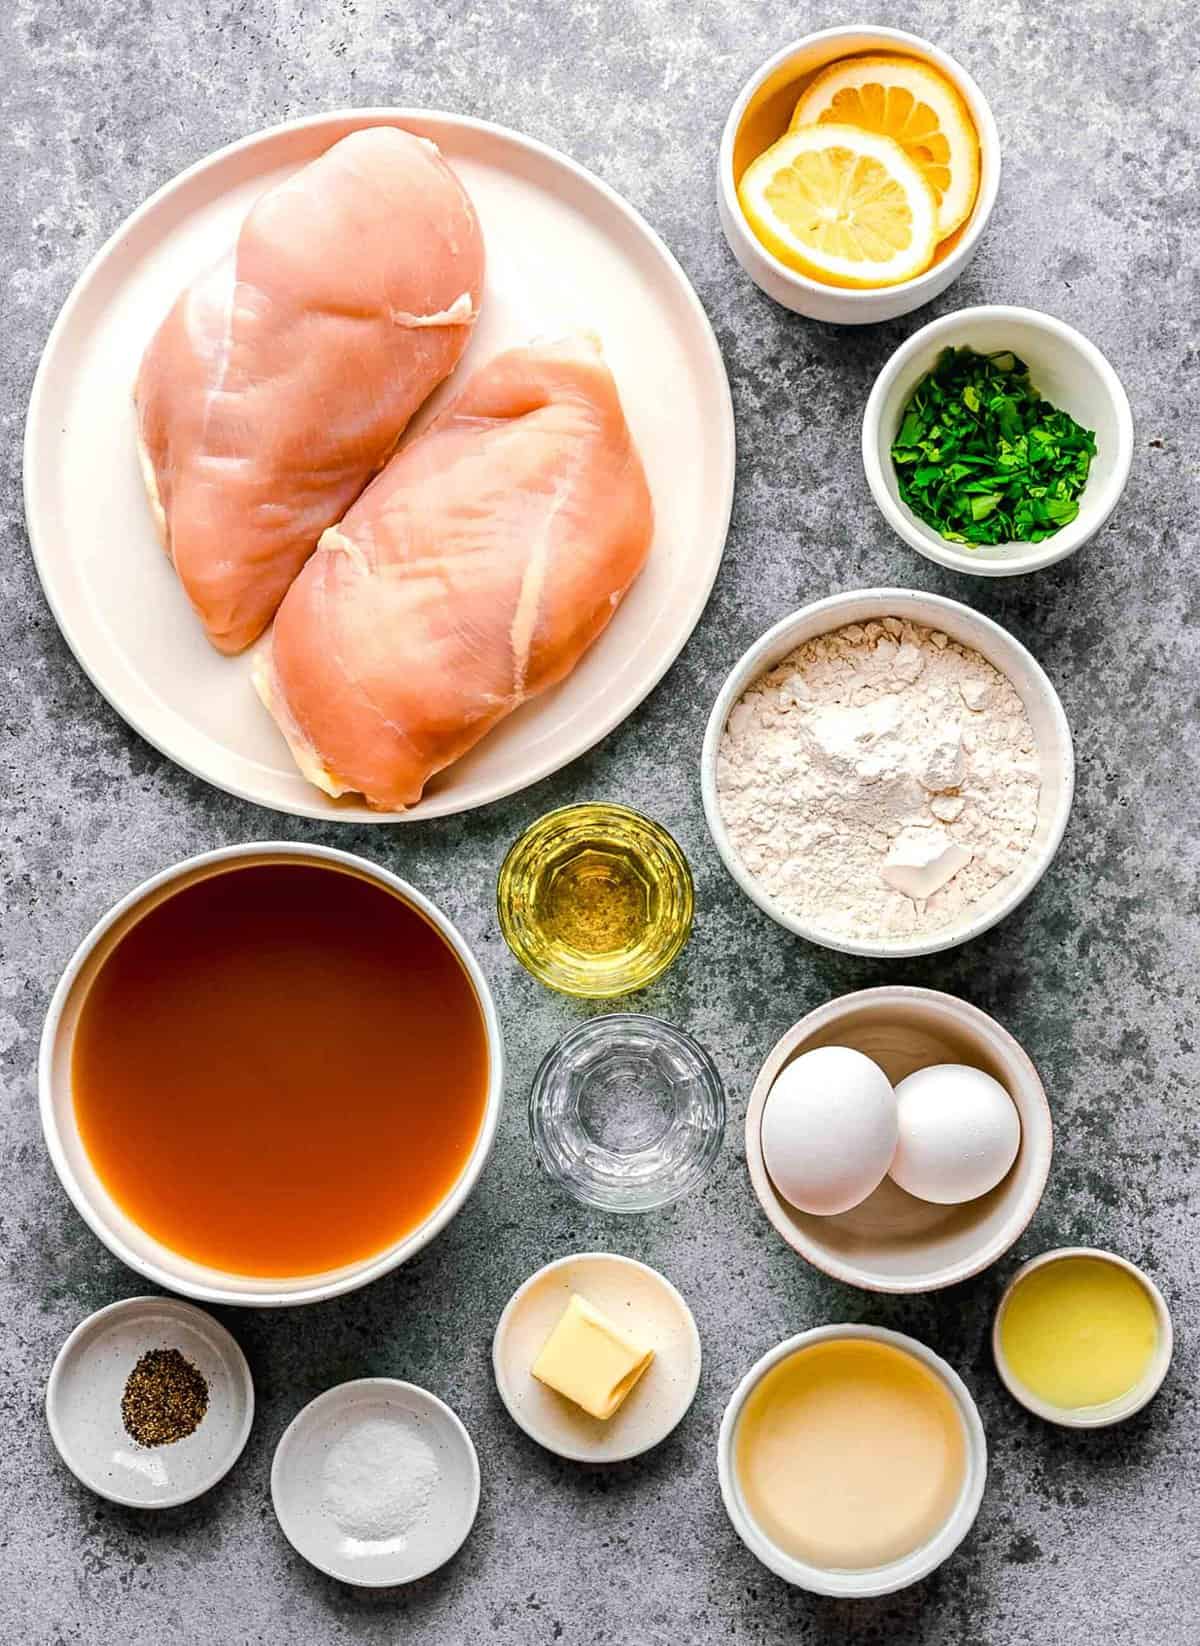 Ingredients for chicken francese arranged on a work surface.